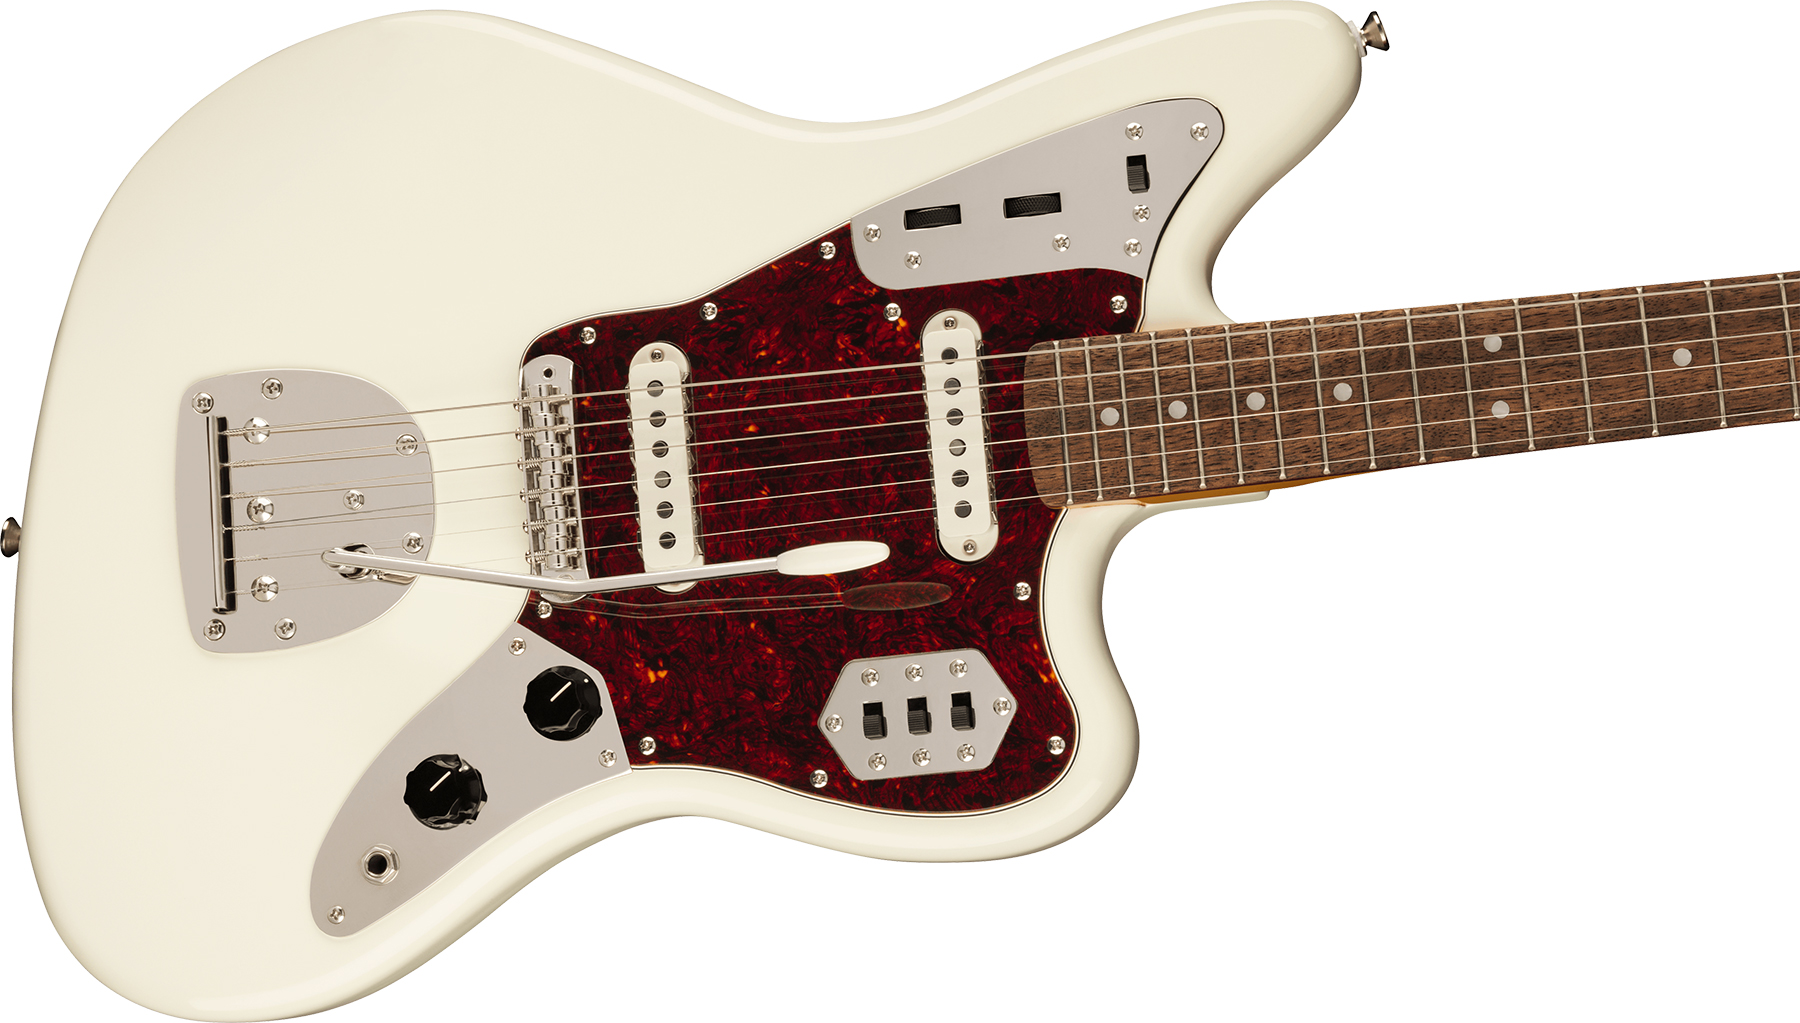 Squier Jaguar Classic Vibe 60s Fsr Ltd Lau - Olympic White With Matching Headstock - Retro rock electric guitar - Variation 2